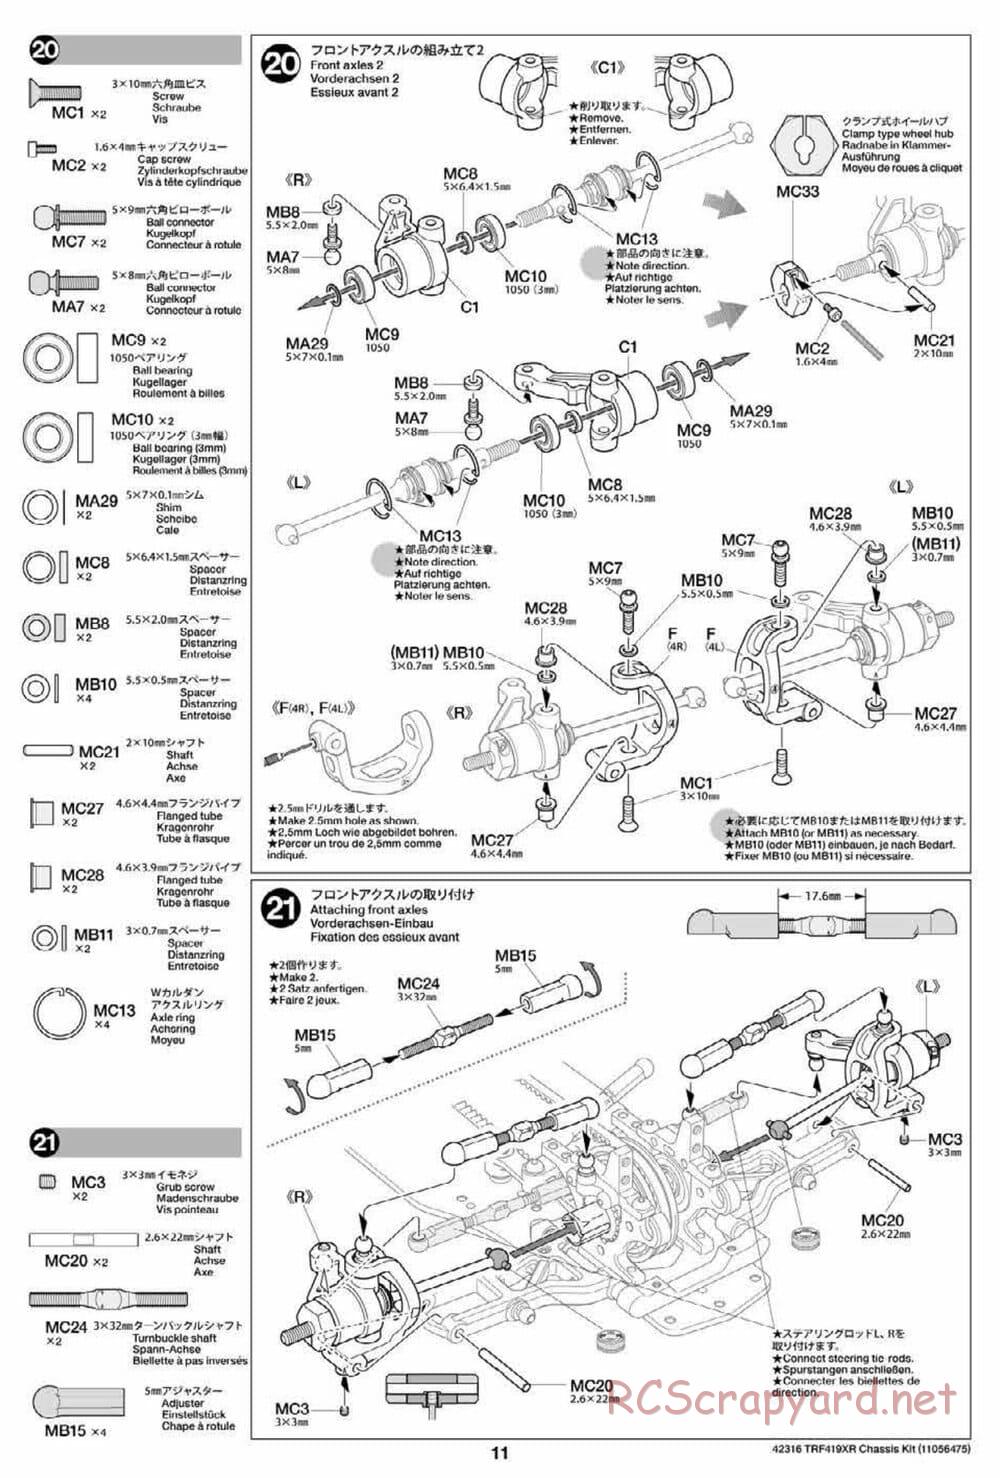 Tamiya - TRF419XR Chassis - Manual - Page 11